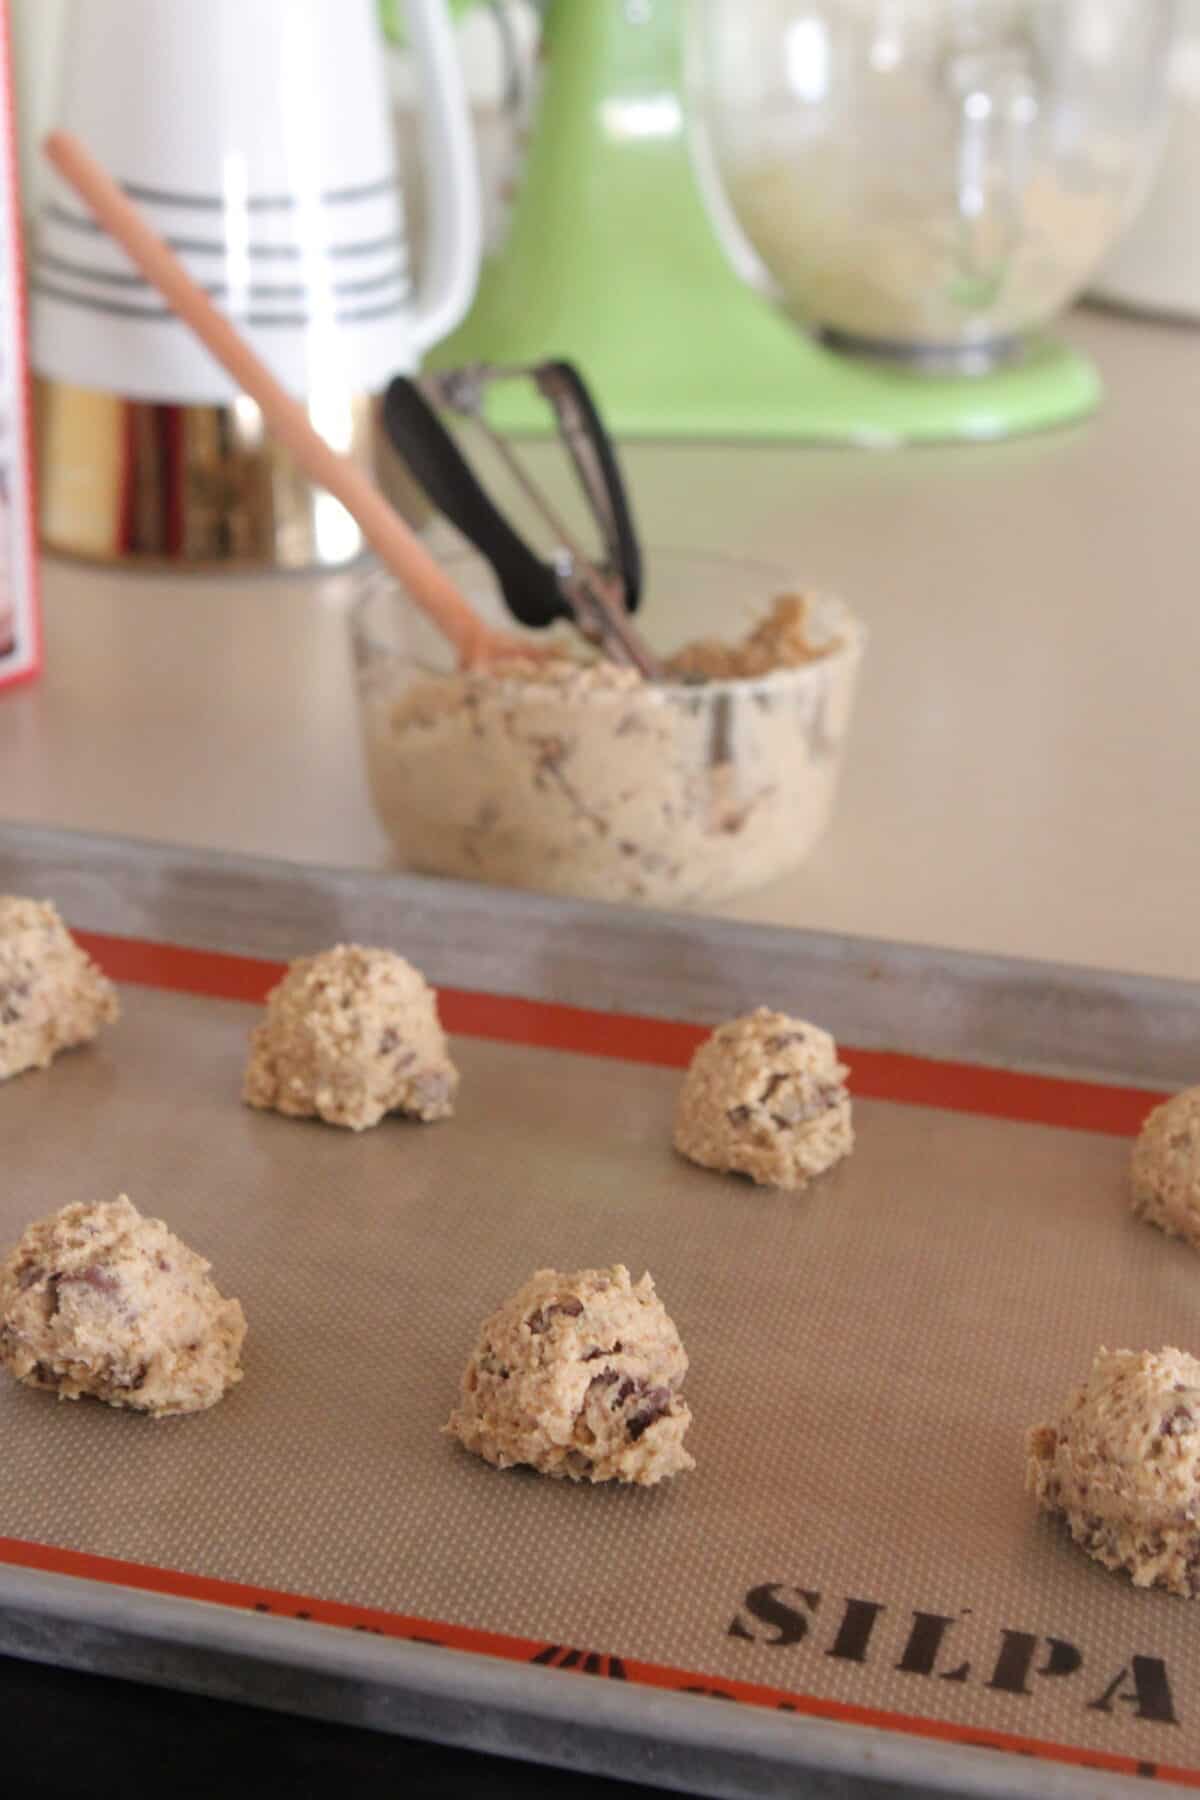 oatmeal chocolate chip cookie dough on baking sheet ready to bake